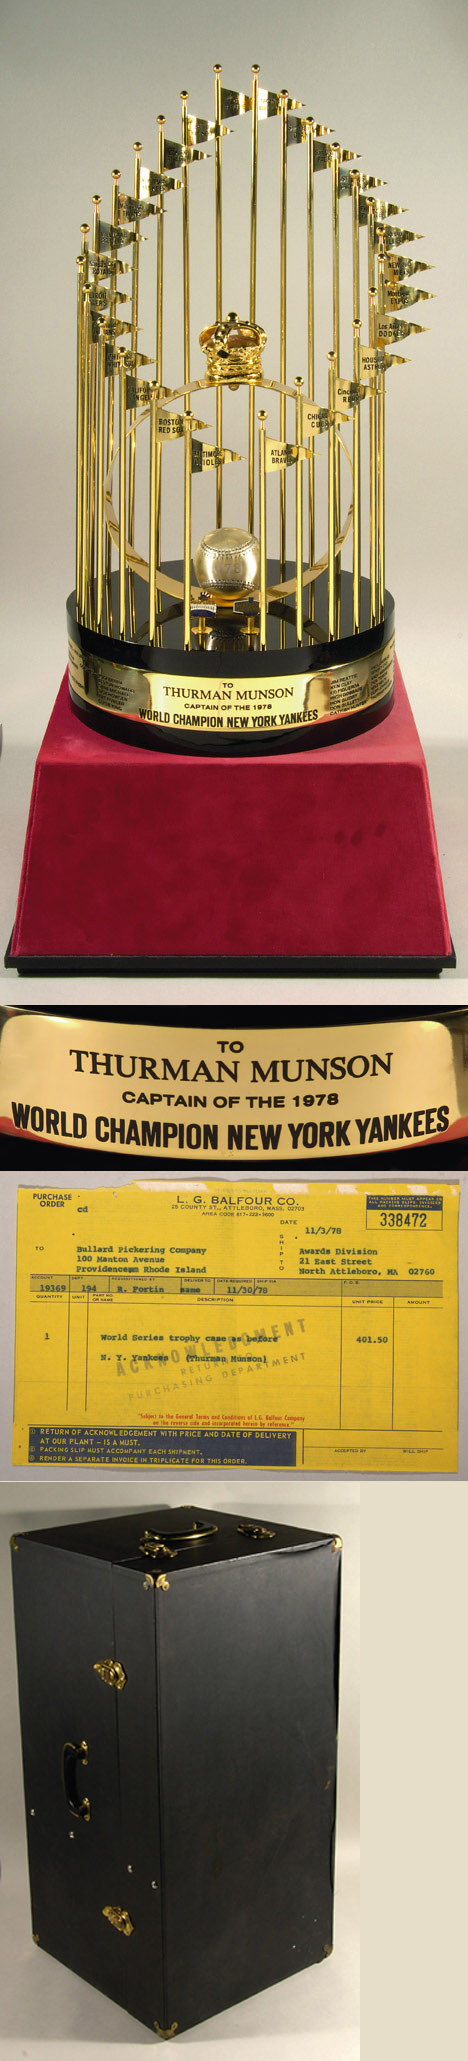 Sell or Auction Your 1982 St Louis Cardinals World Series Trophy